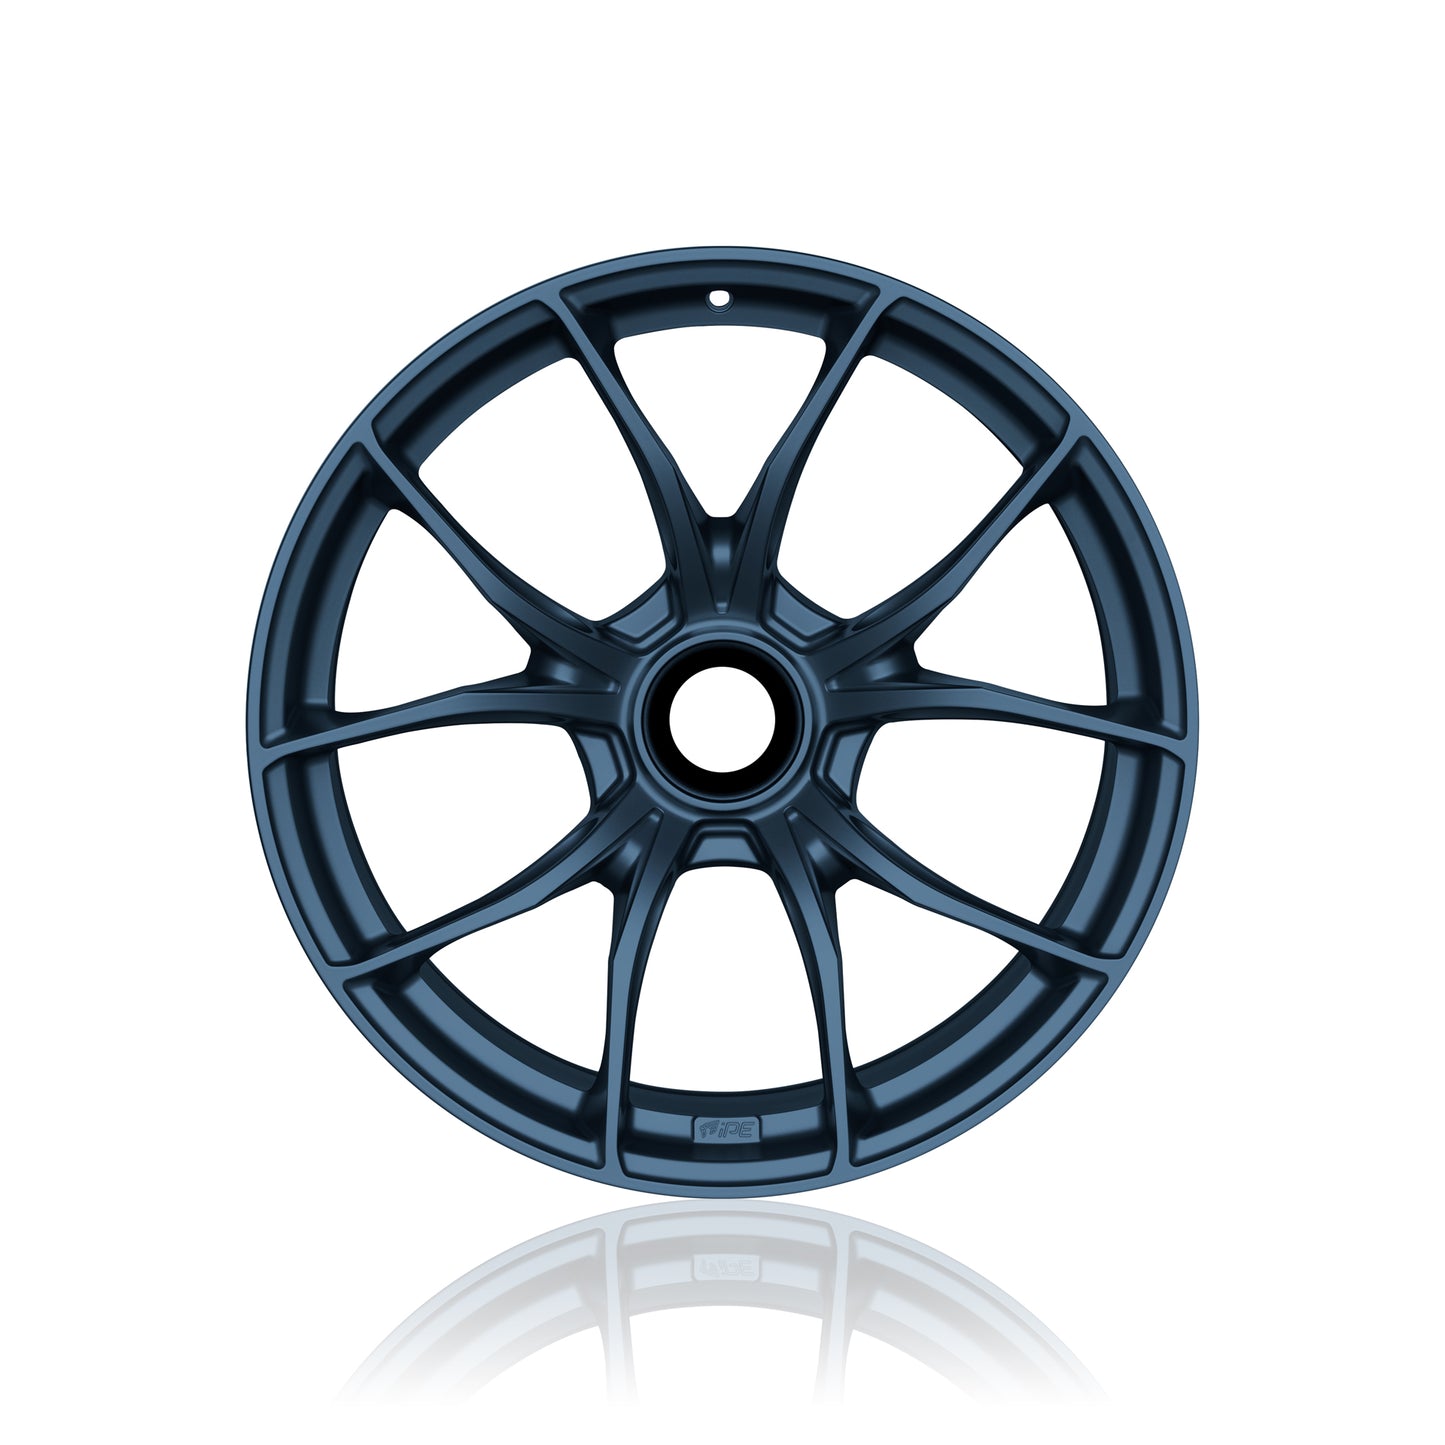 Front view of a blue IPE MFR-01 Magnesium wheel on a white background